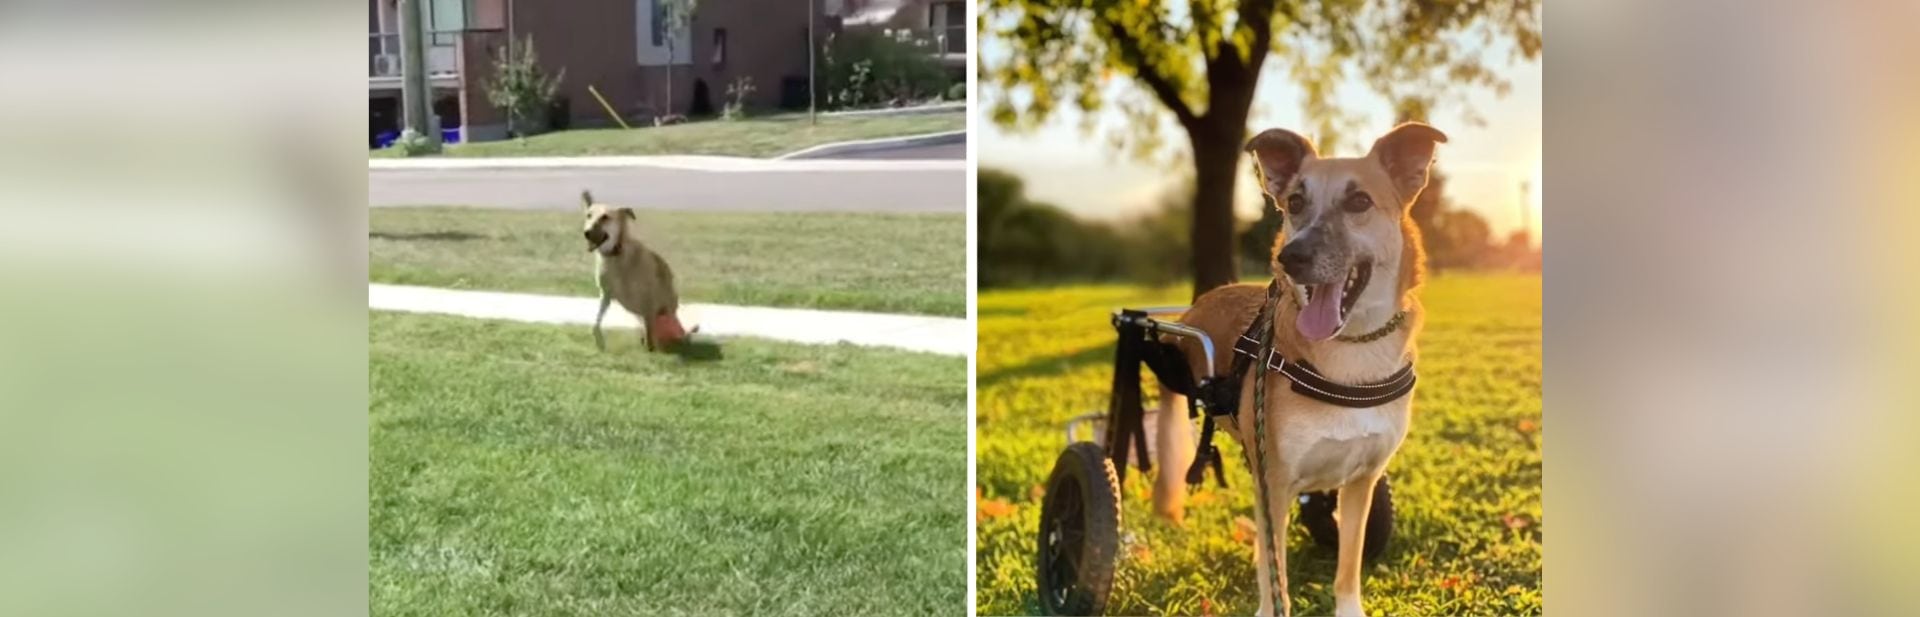 Paralyzed And Alone, Two-Legged Pup Finds More Than A Home Through Unexpected Miracle